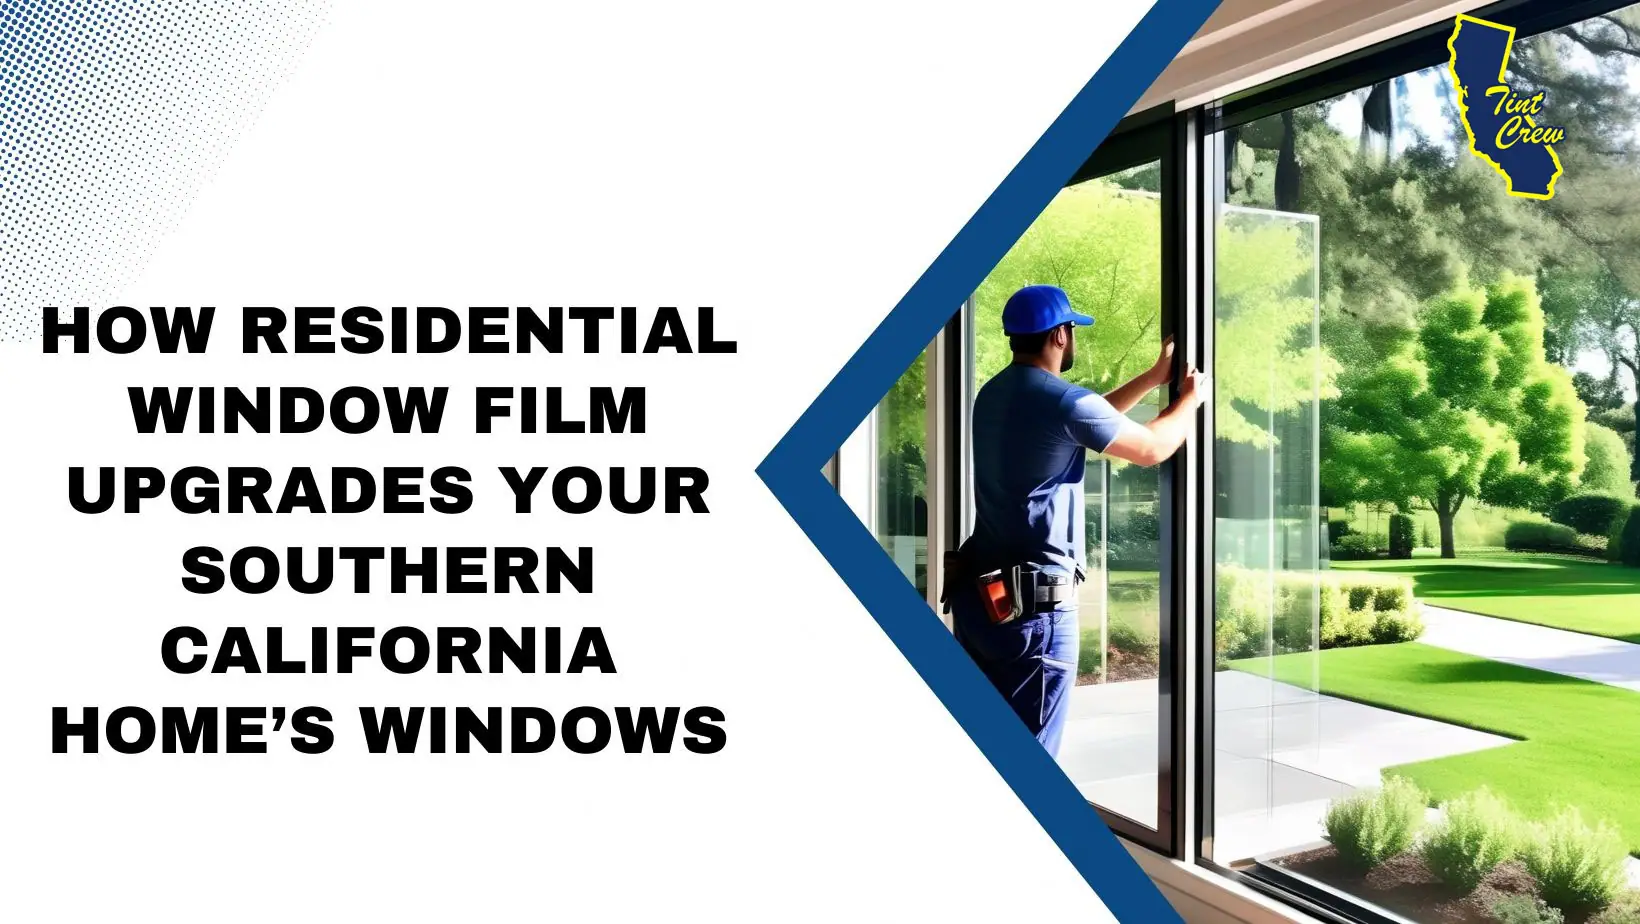 How Residential Window Film Upgrades Your Southern California Home’s Windows